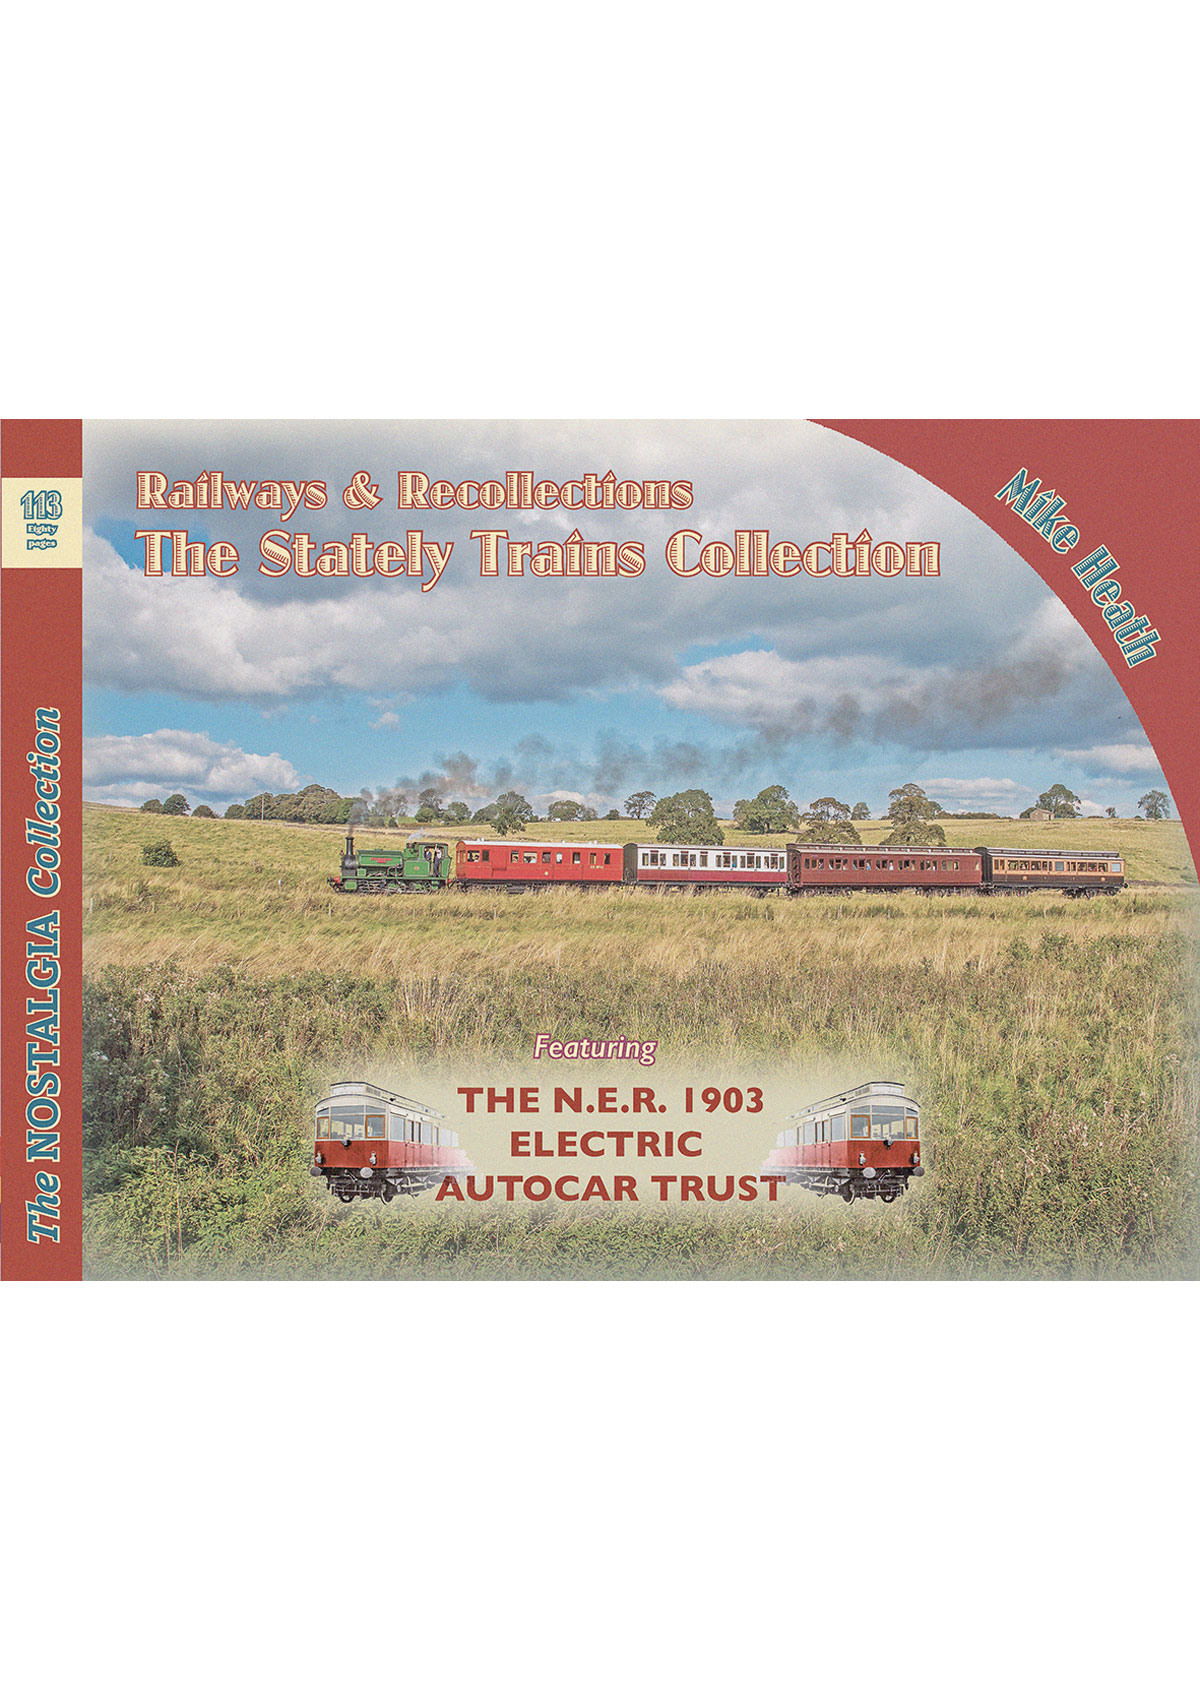 5751 - Railways & Recollections - The Stately Trains Collection